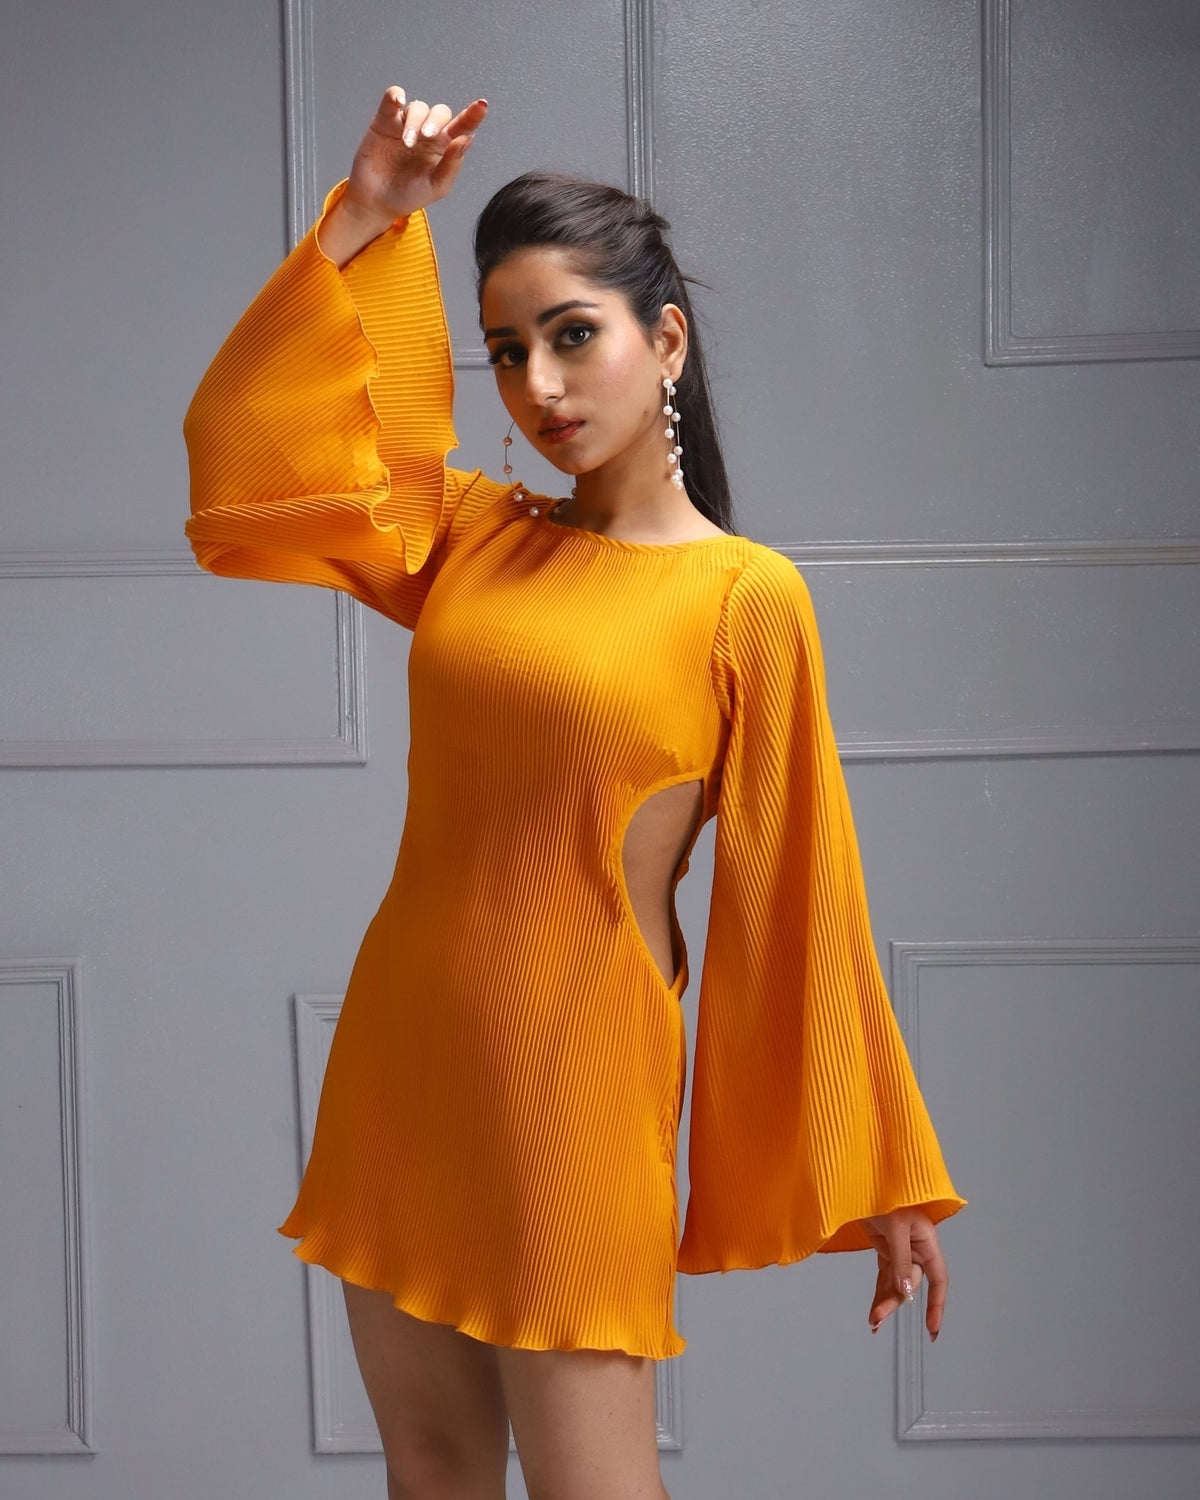 Bell Sleeve Dress, Orange Dress, Cut-out Dress, Fun Party Outfit, Bright Dress, Vibrant Fashion, Chic Look, Elegant Attire,